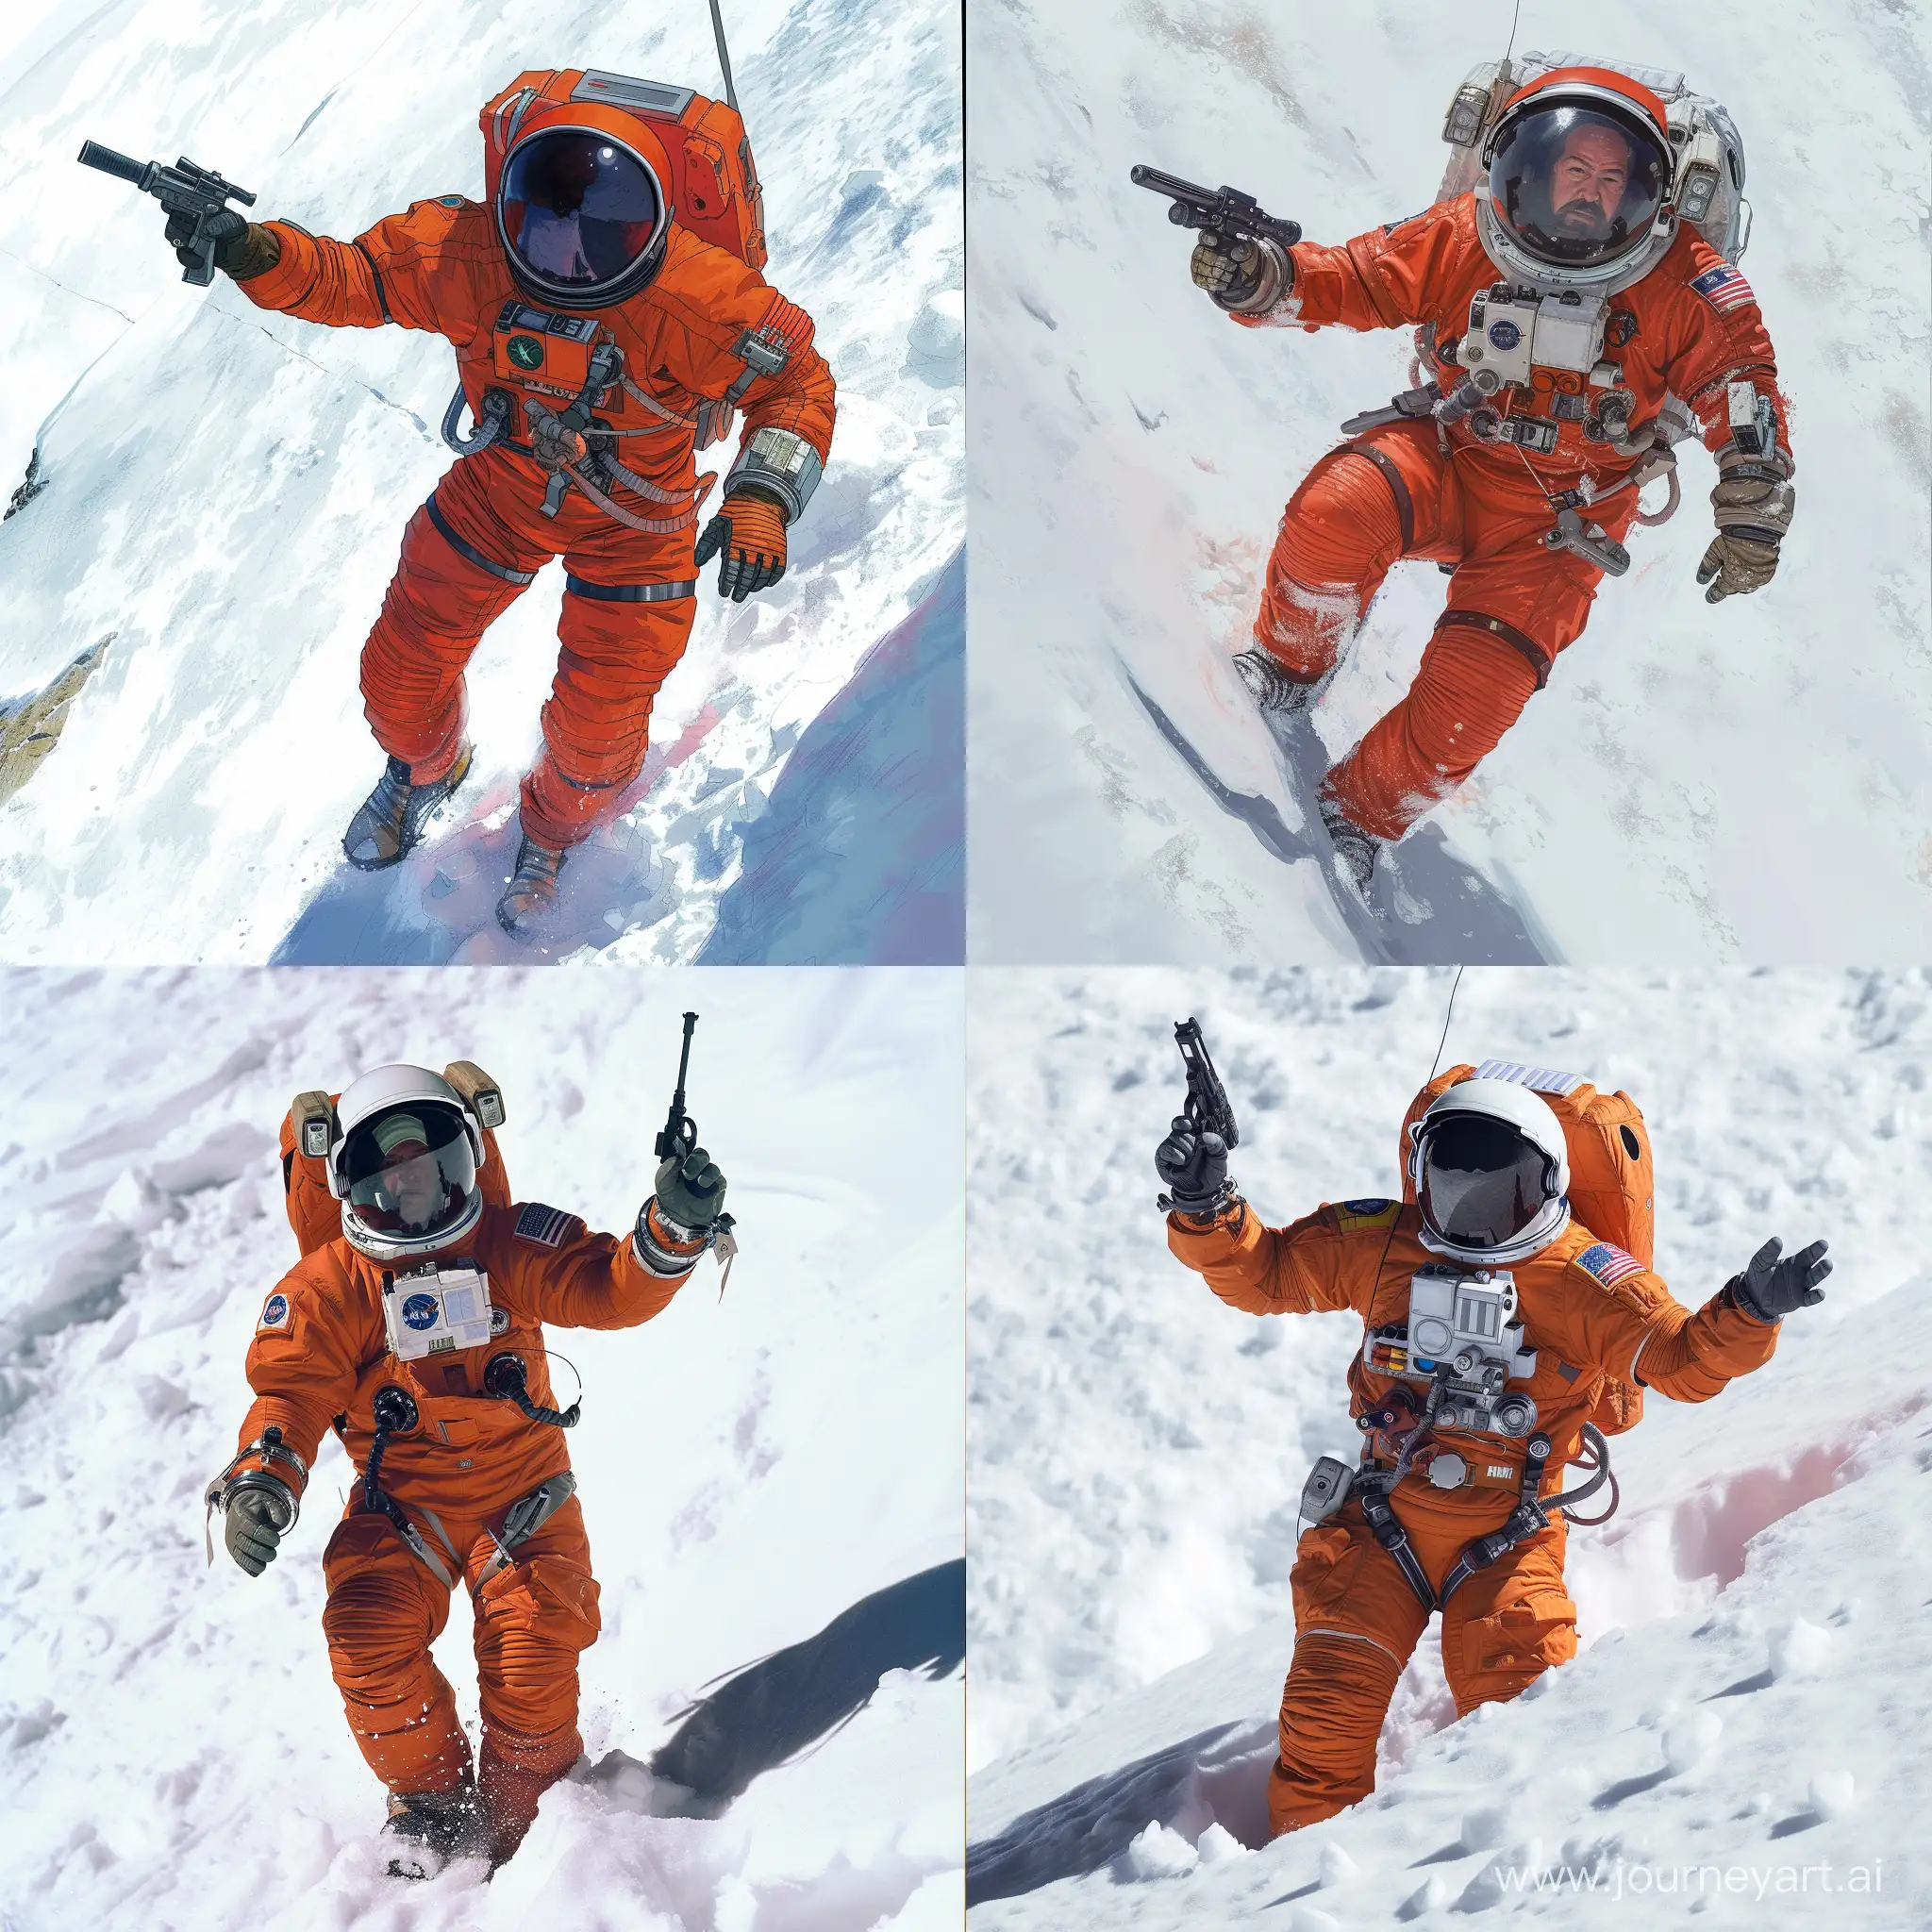 An astronaut in an orange spacesuit is barely standing on a snow-covered slope. He has a blaster in his right hand, which he points forward. He covers his stomach with his left hand.